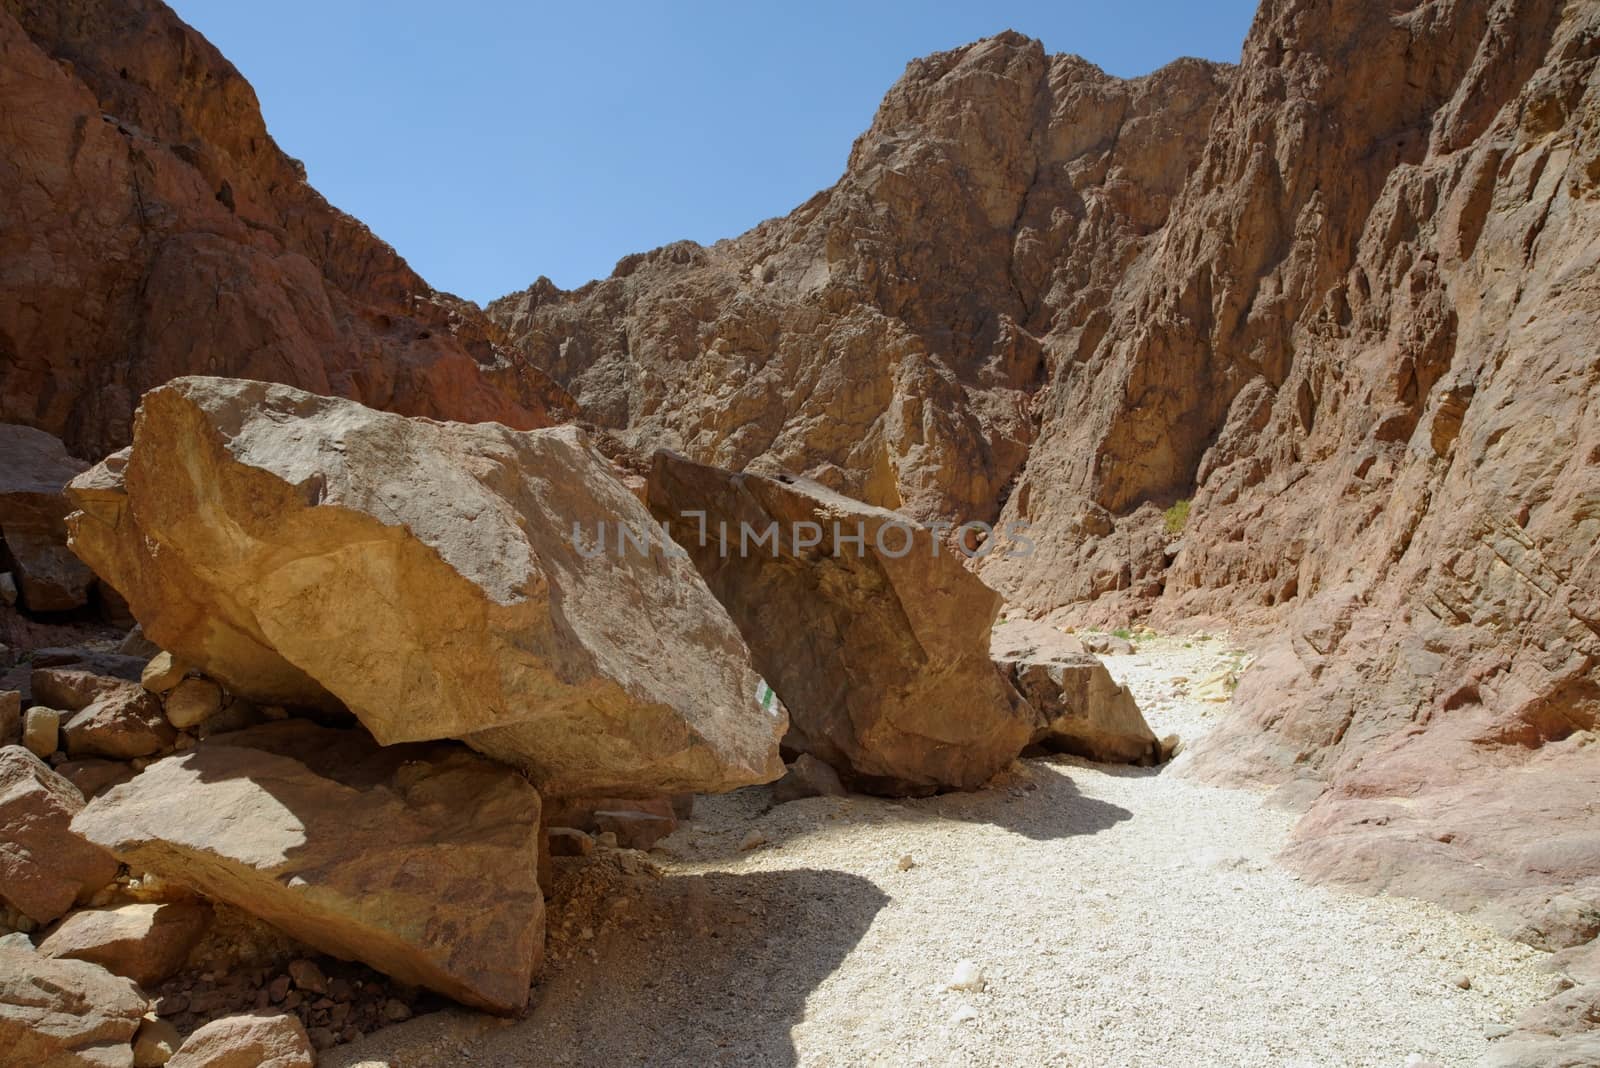 Scenic boulders in the desert canyon, Israel by slavapolo